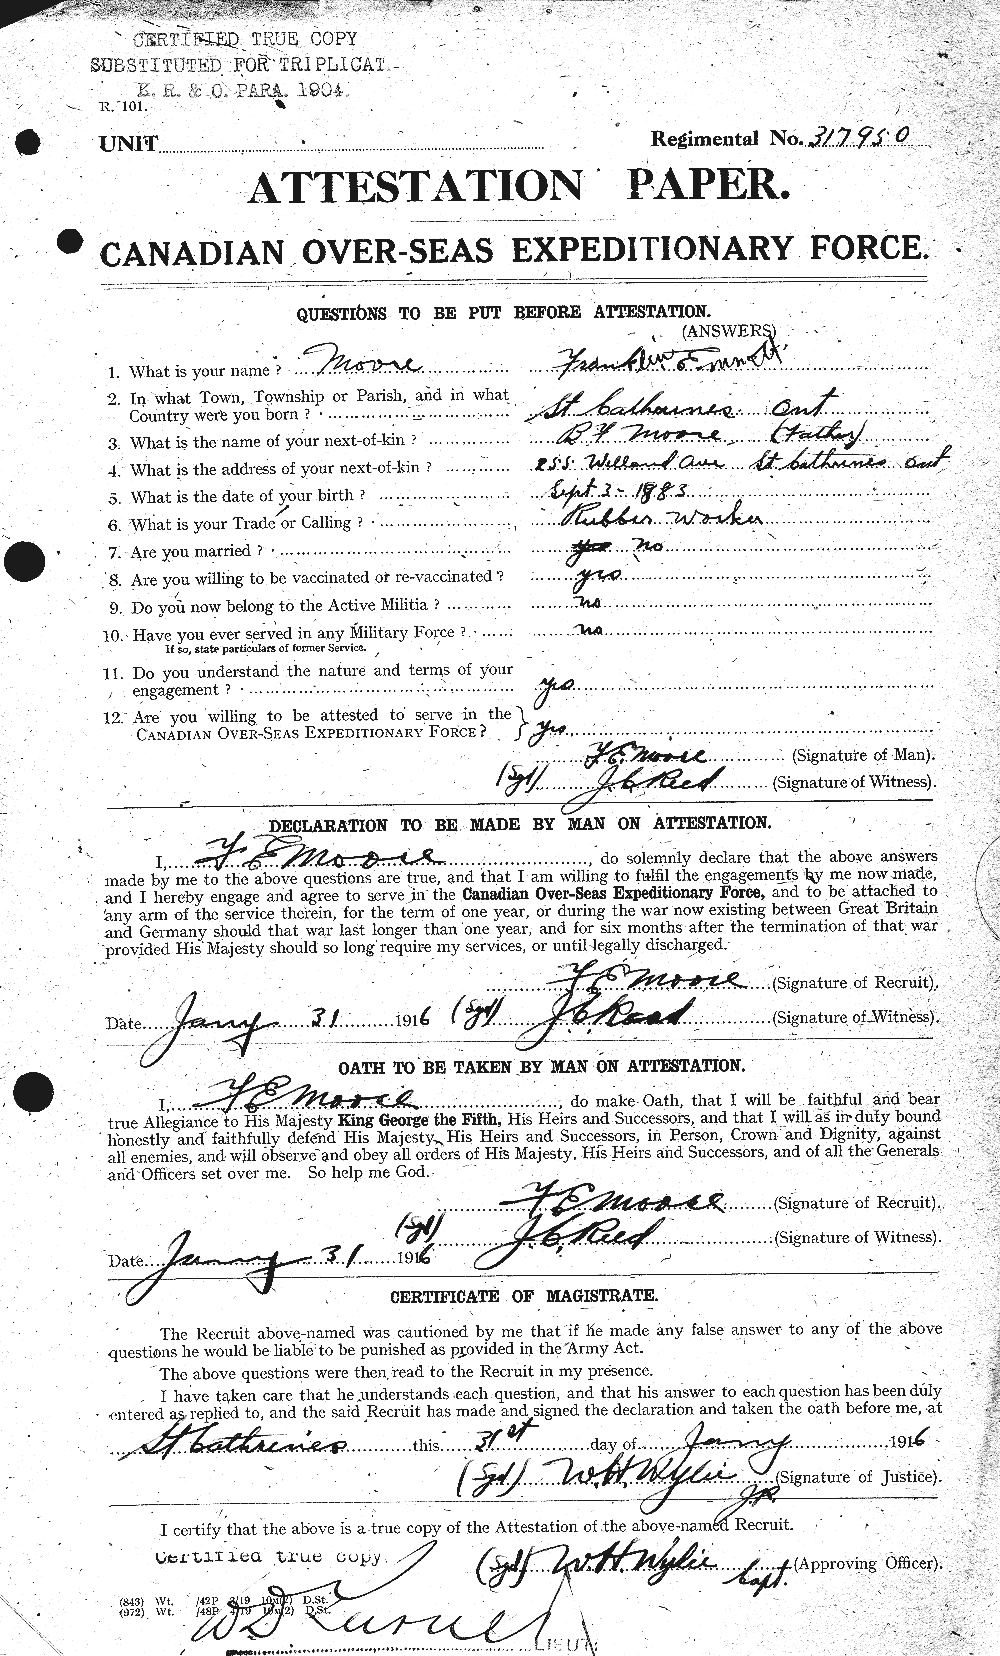 Personnel Records of the First World War - CEF 506716a